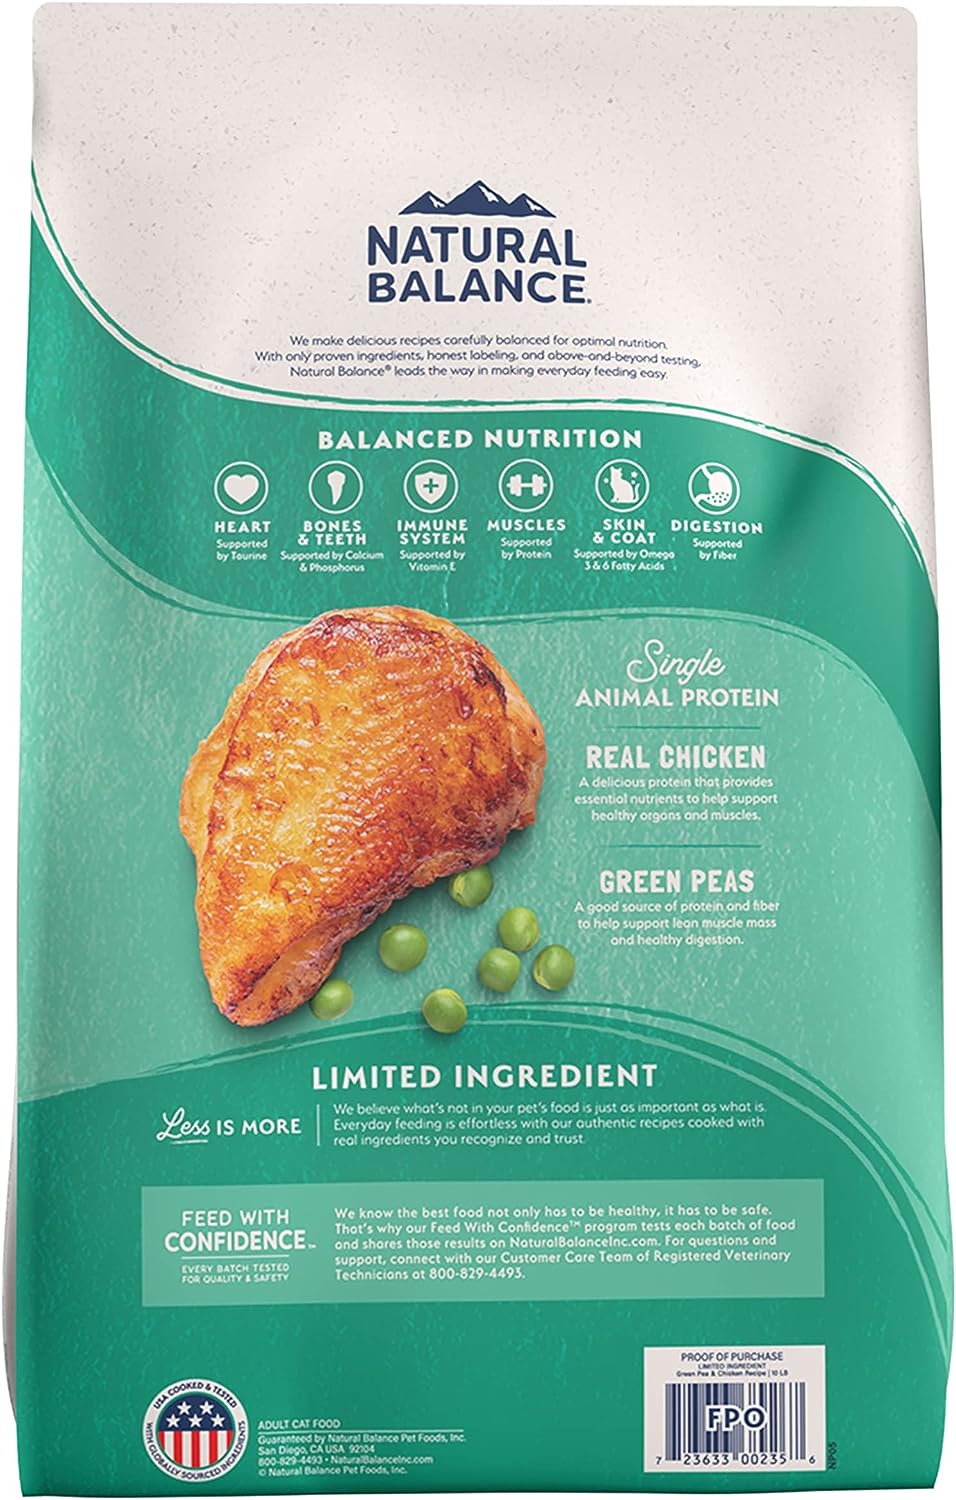 Natural Balance L.I.D. Limited Ingredient Diets Green Pea & Chicken Dry Cat Food